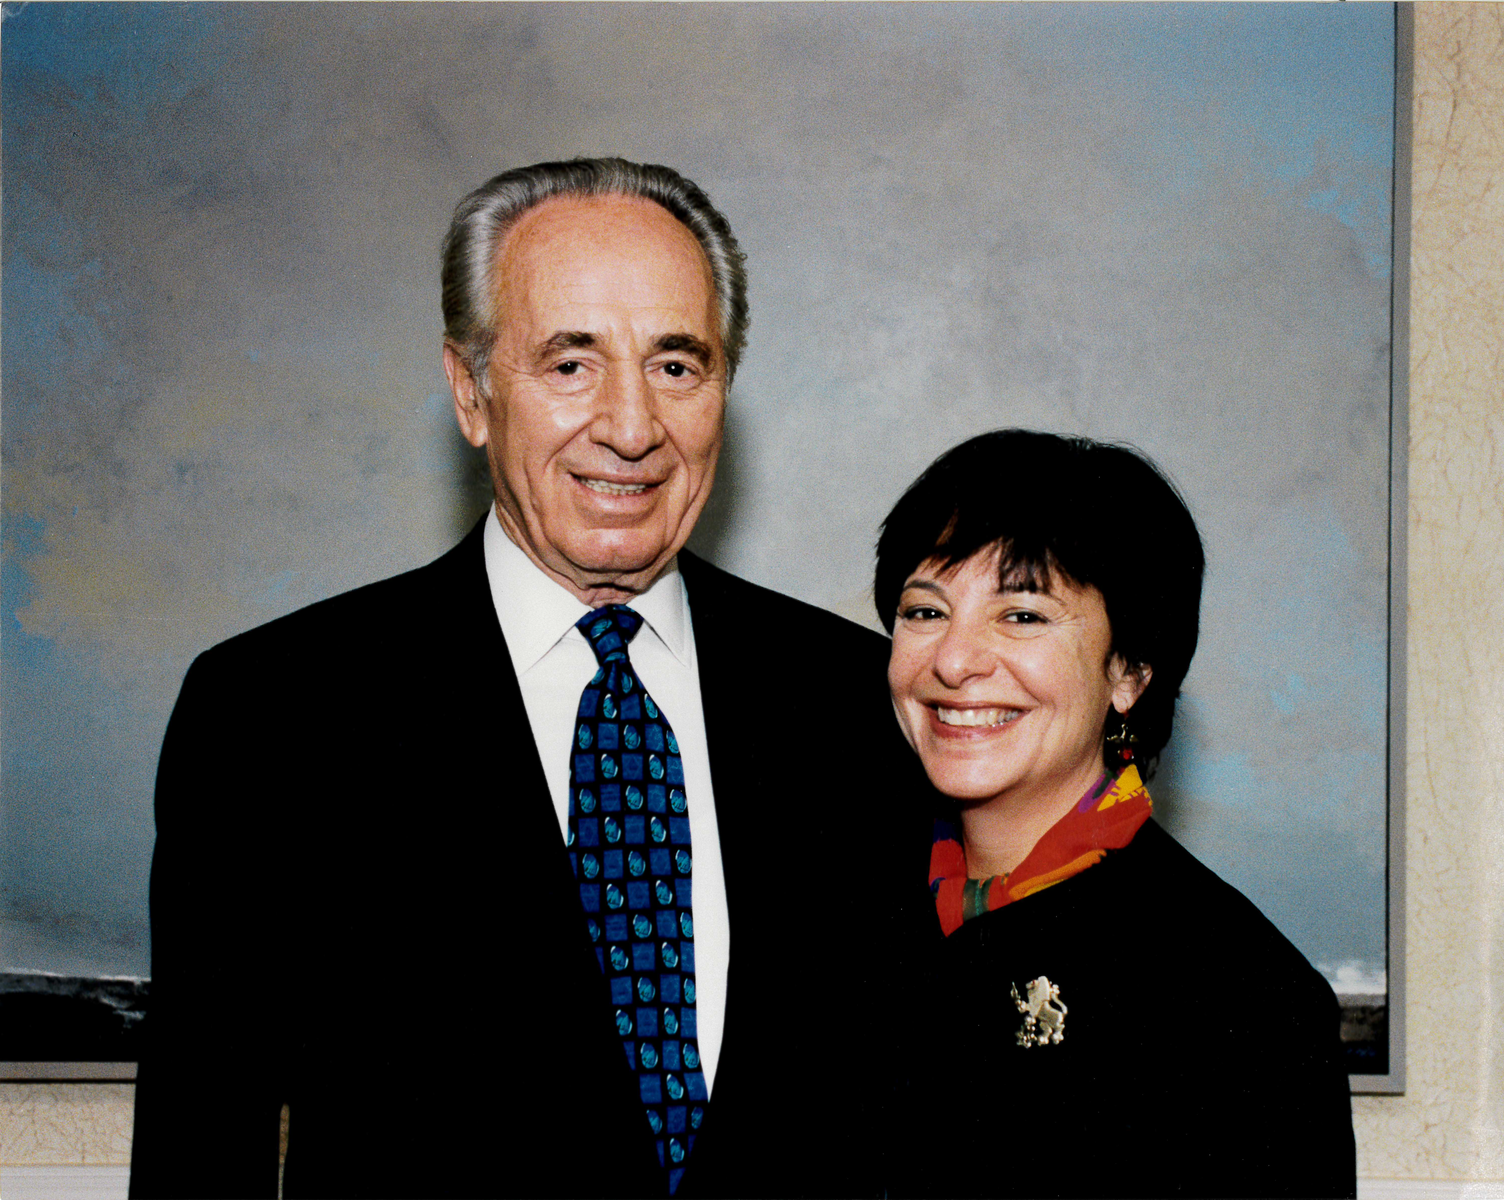 Michele Rosen with the former Israeli Prime Minister and President, Shimon Peres.